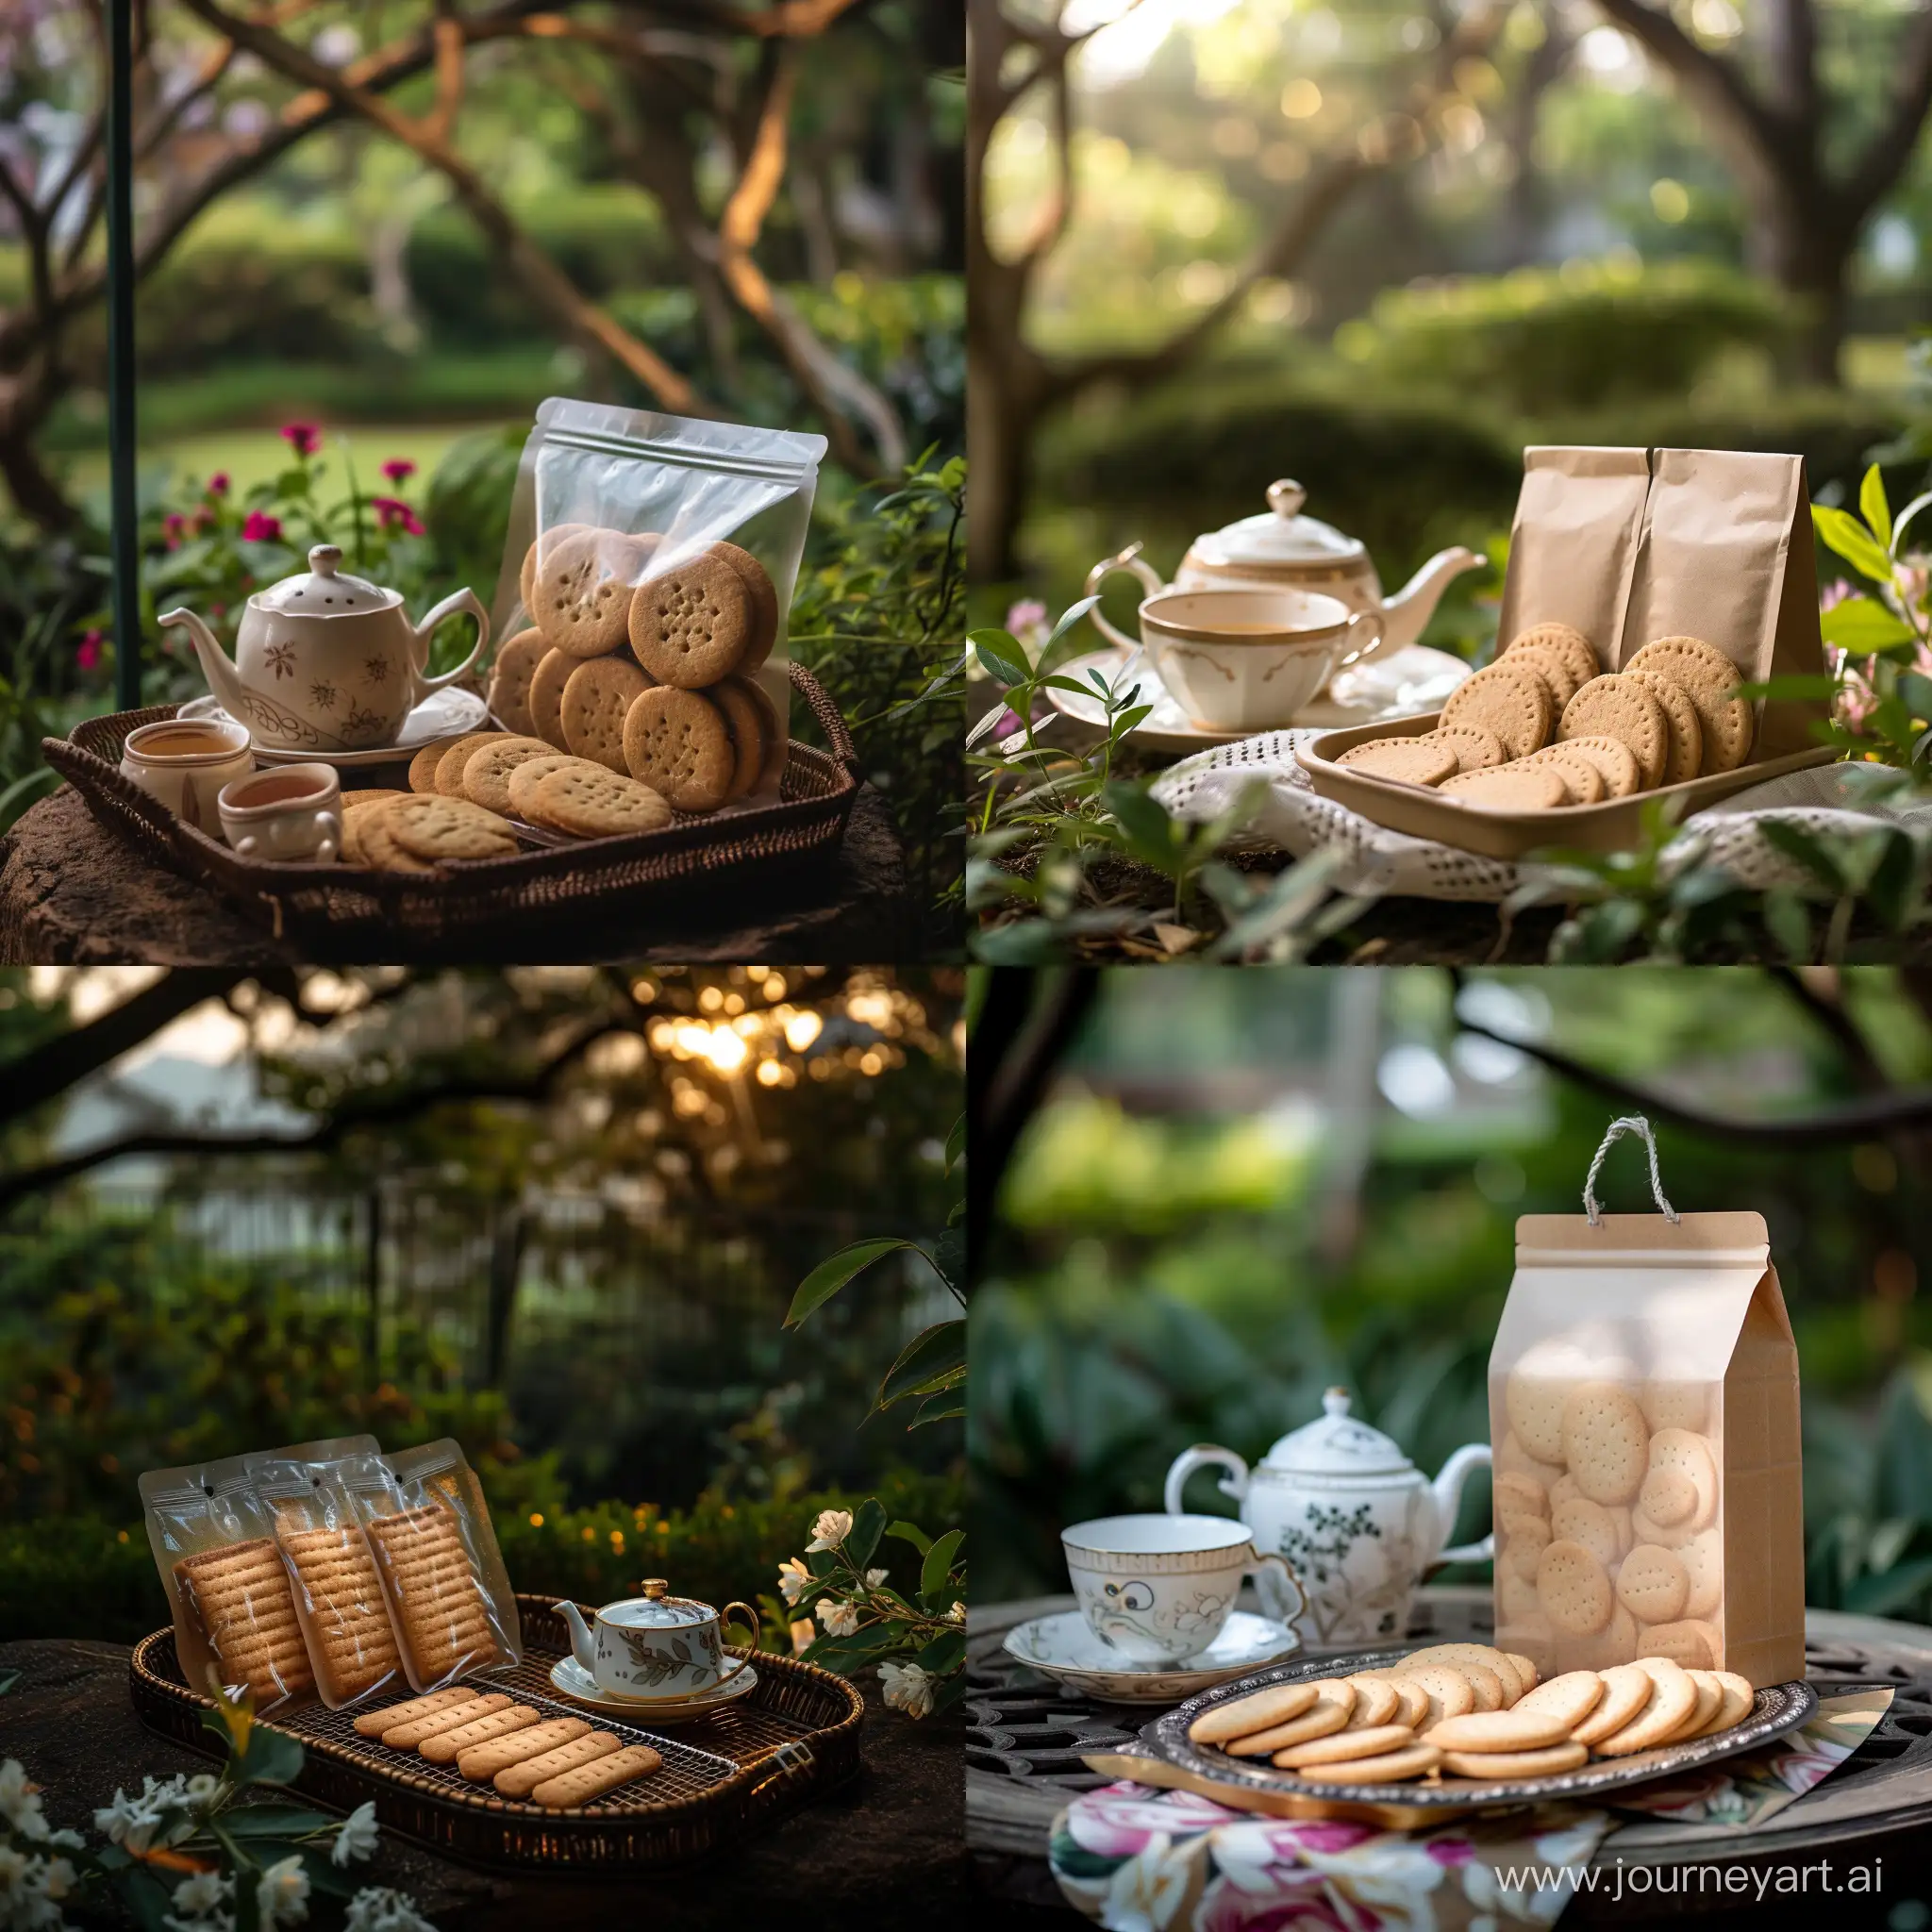 Evening-Tea-in-Garden-Cookies-Packet-with-Tray-and-Tea-Set